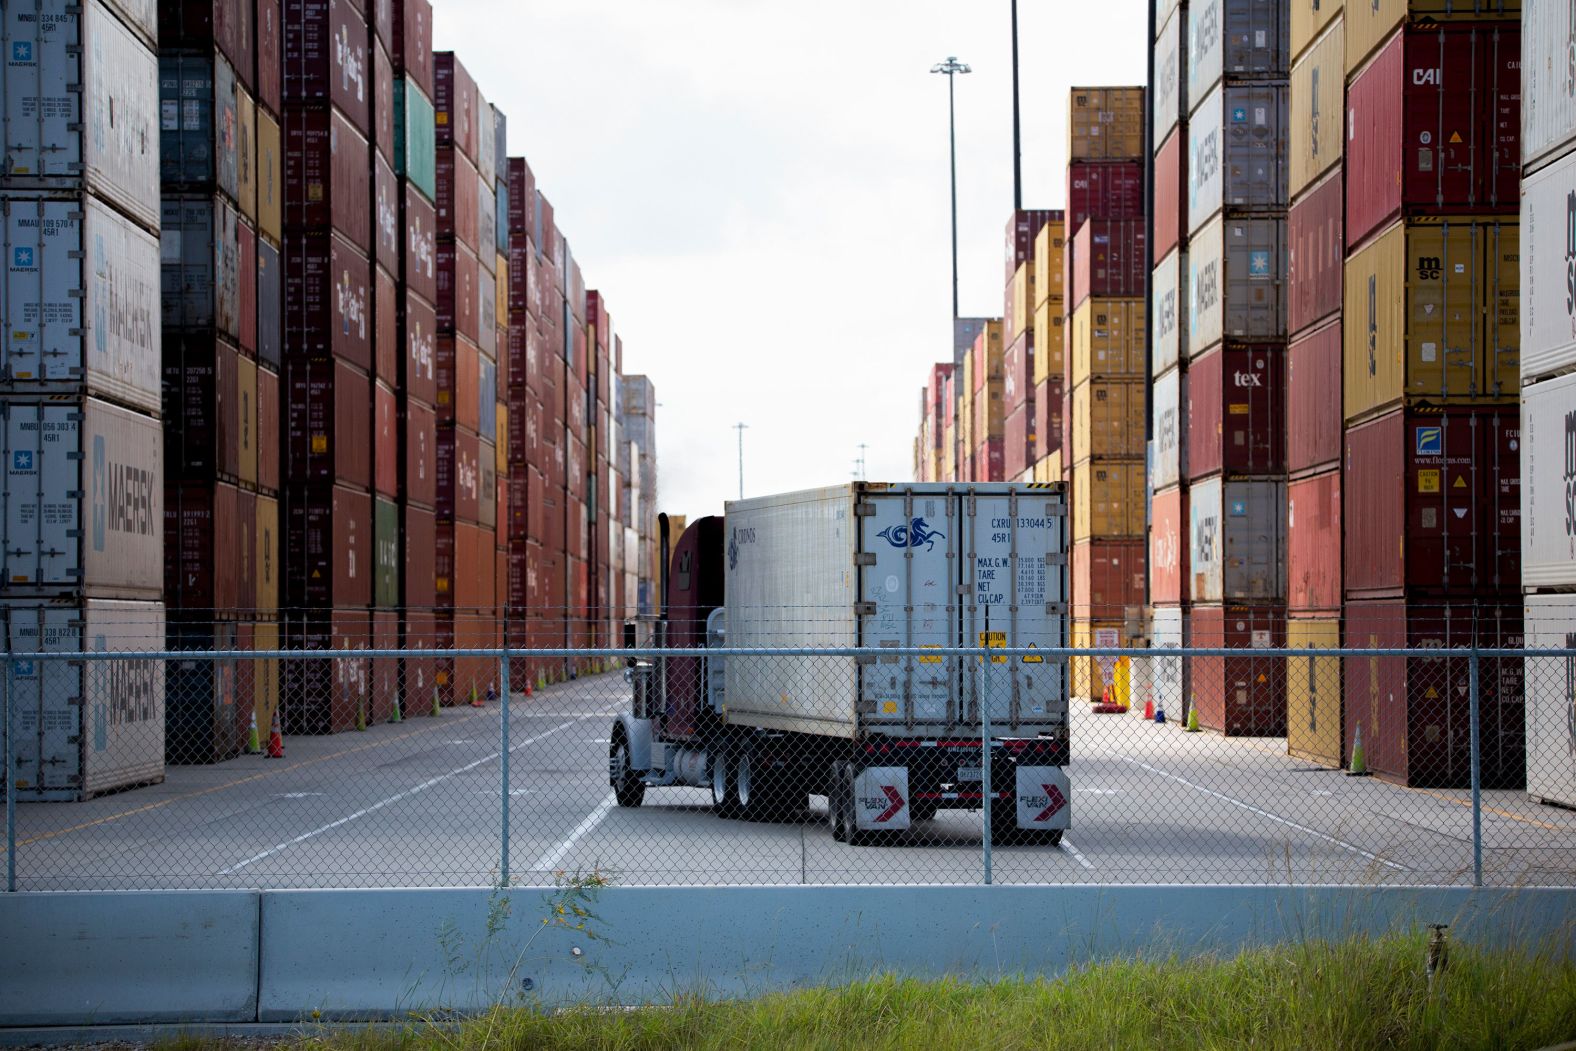 An 18-wheeler enters one of the main shipping container corridors on October 12 at The Port of Houston in Texas.